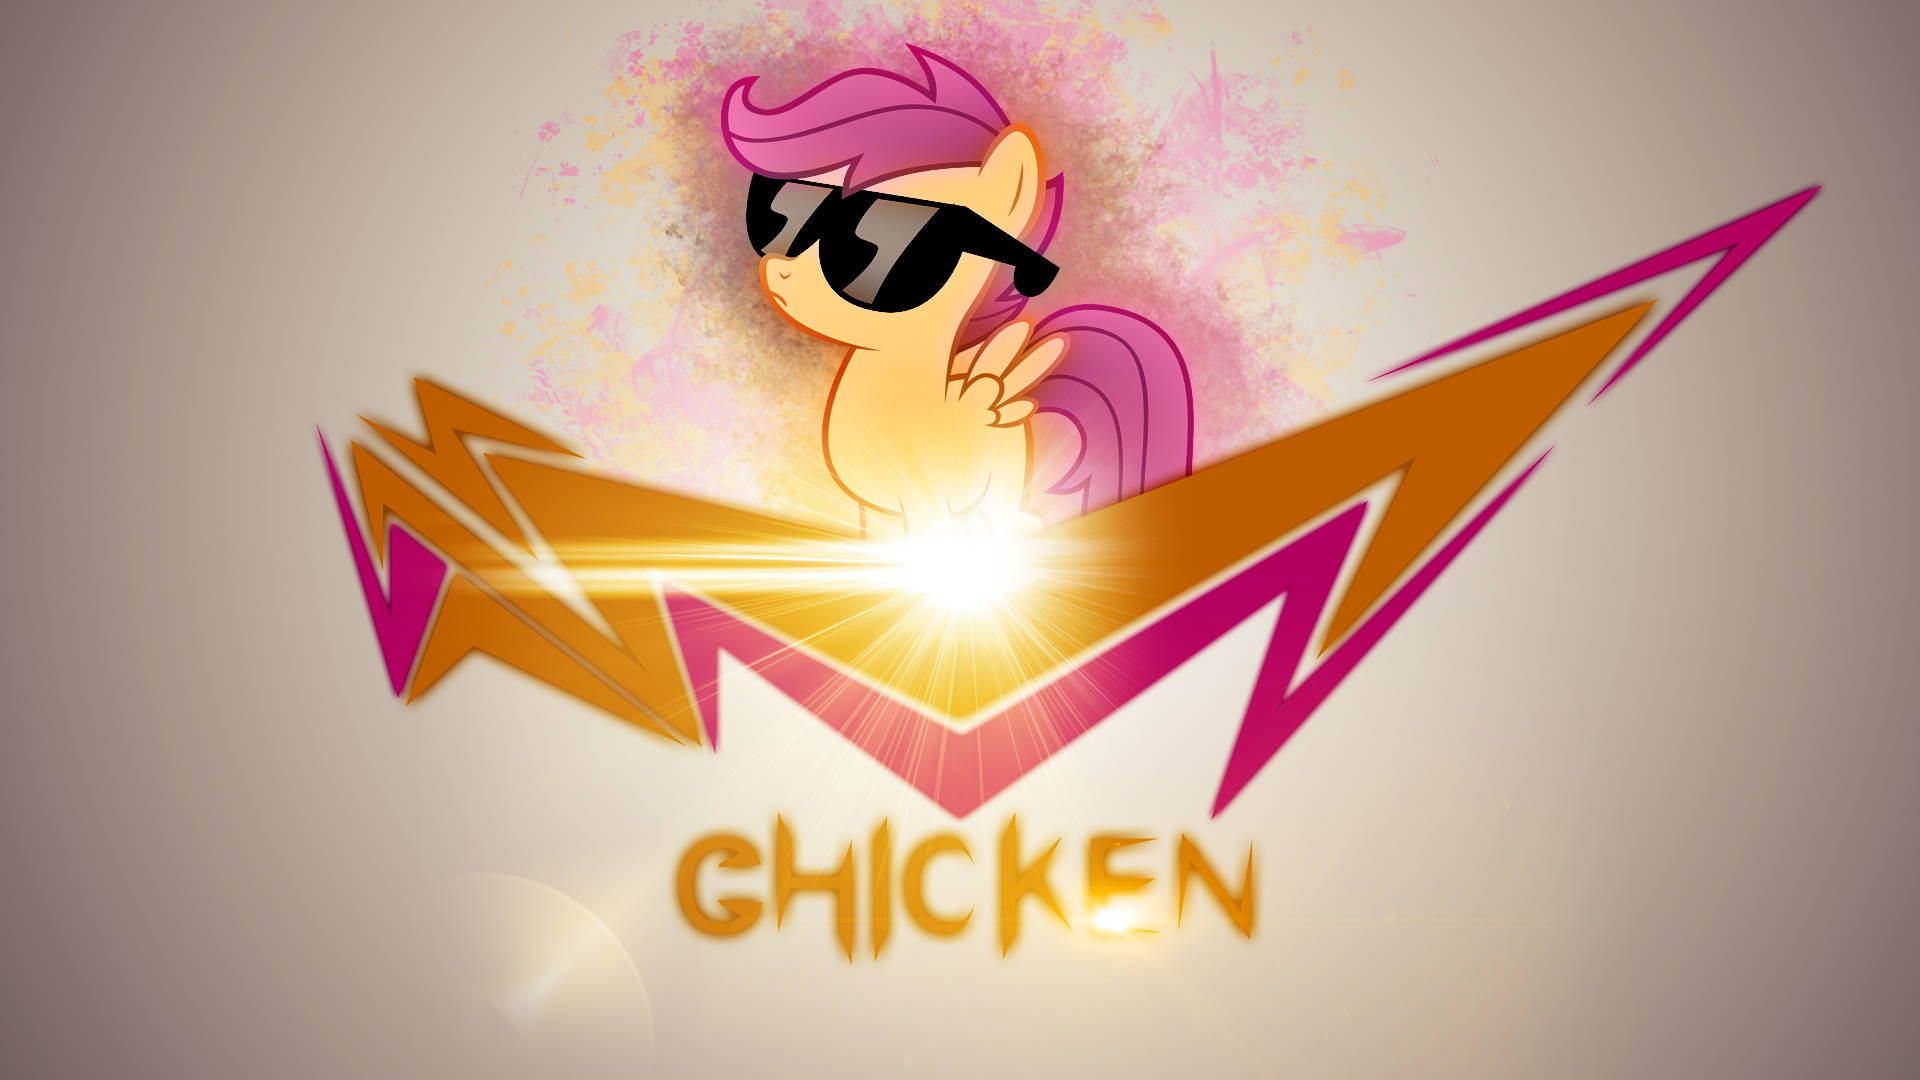 Chickenlicious by Austiniousi and Karl97